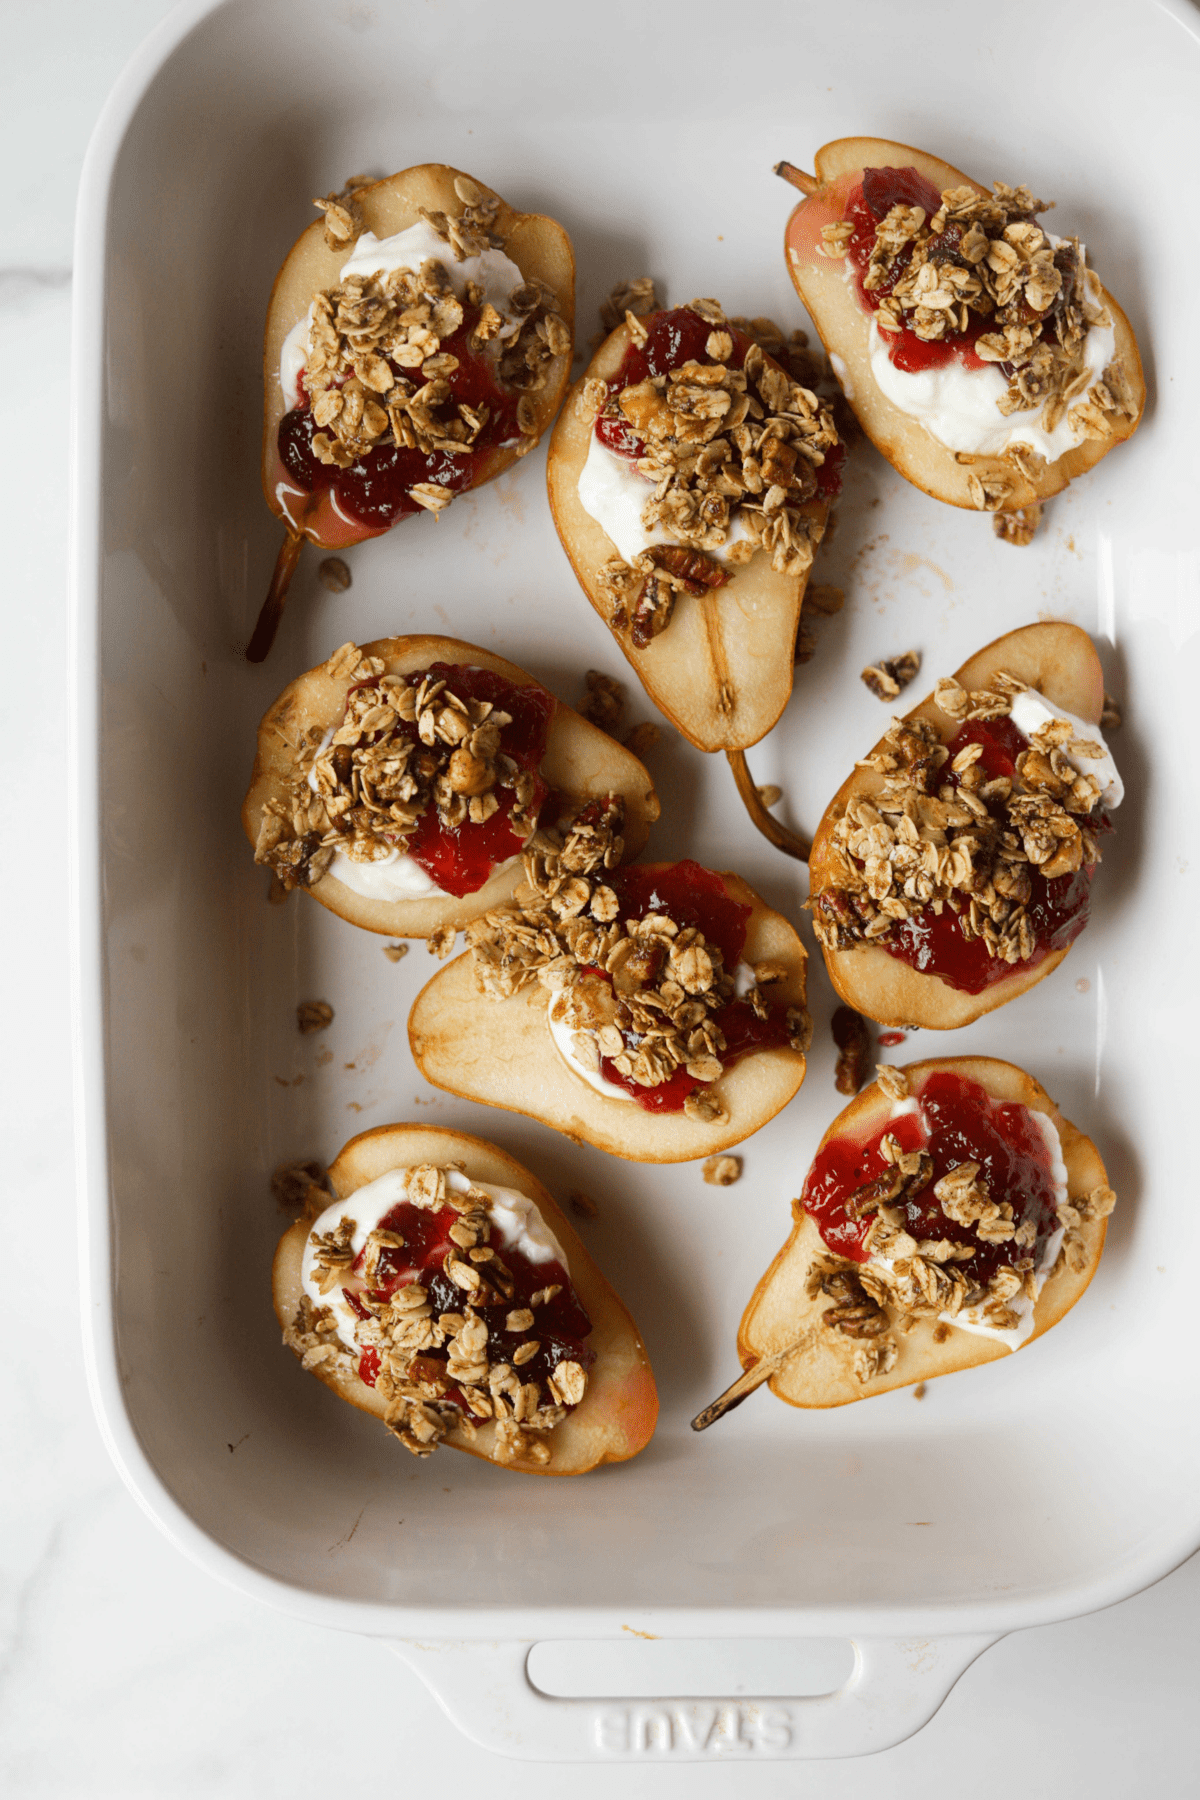 An overhead shot of a baking dish filled with cranberry stuffed pears.